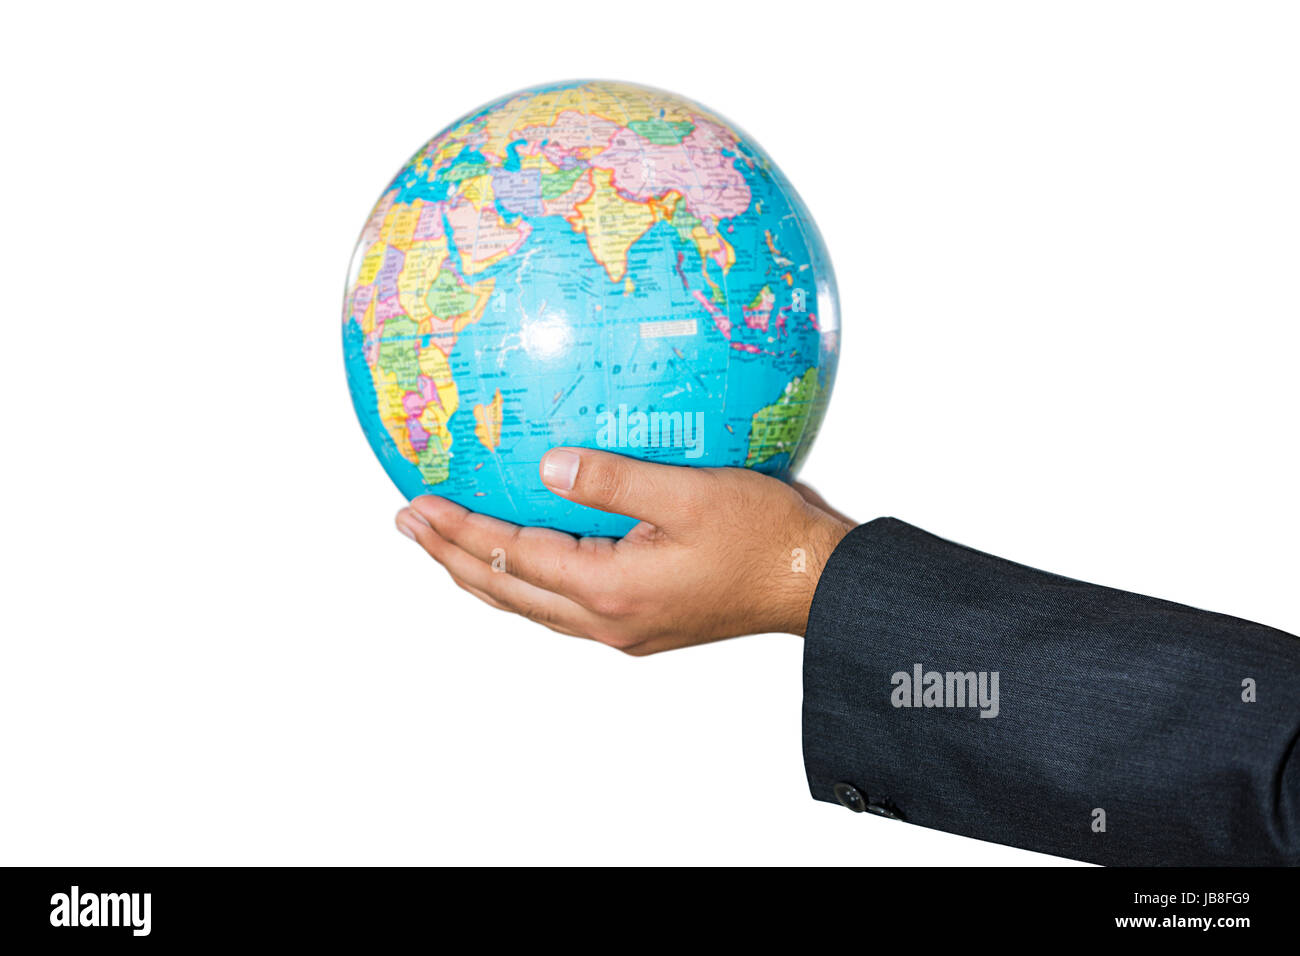 1 business man hand holding globe map Banque D'Images